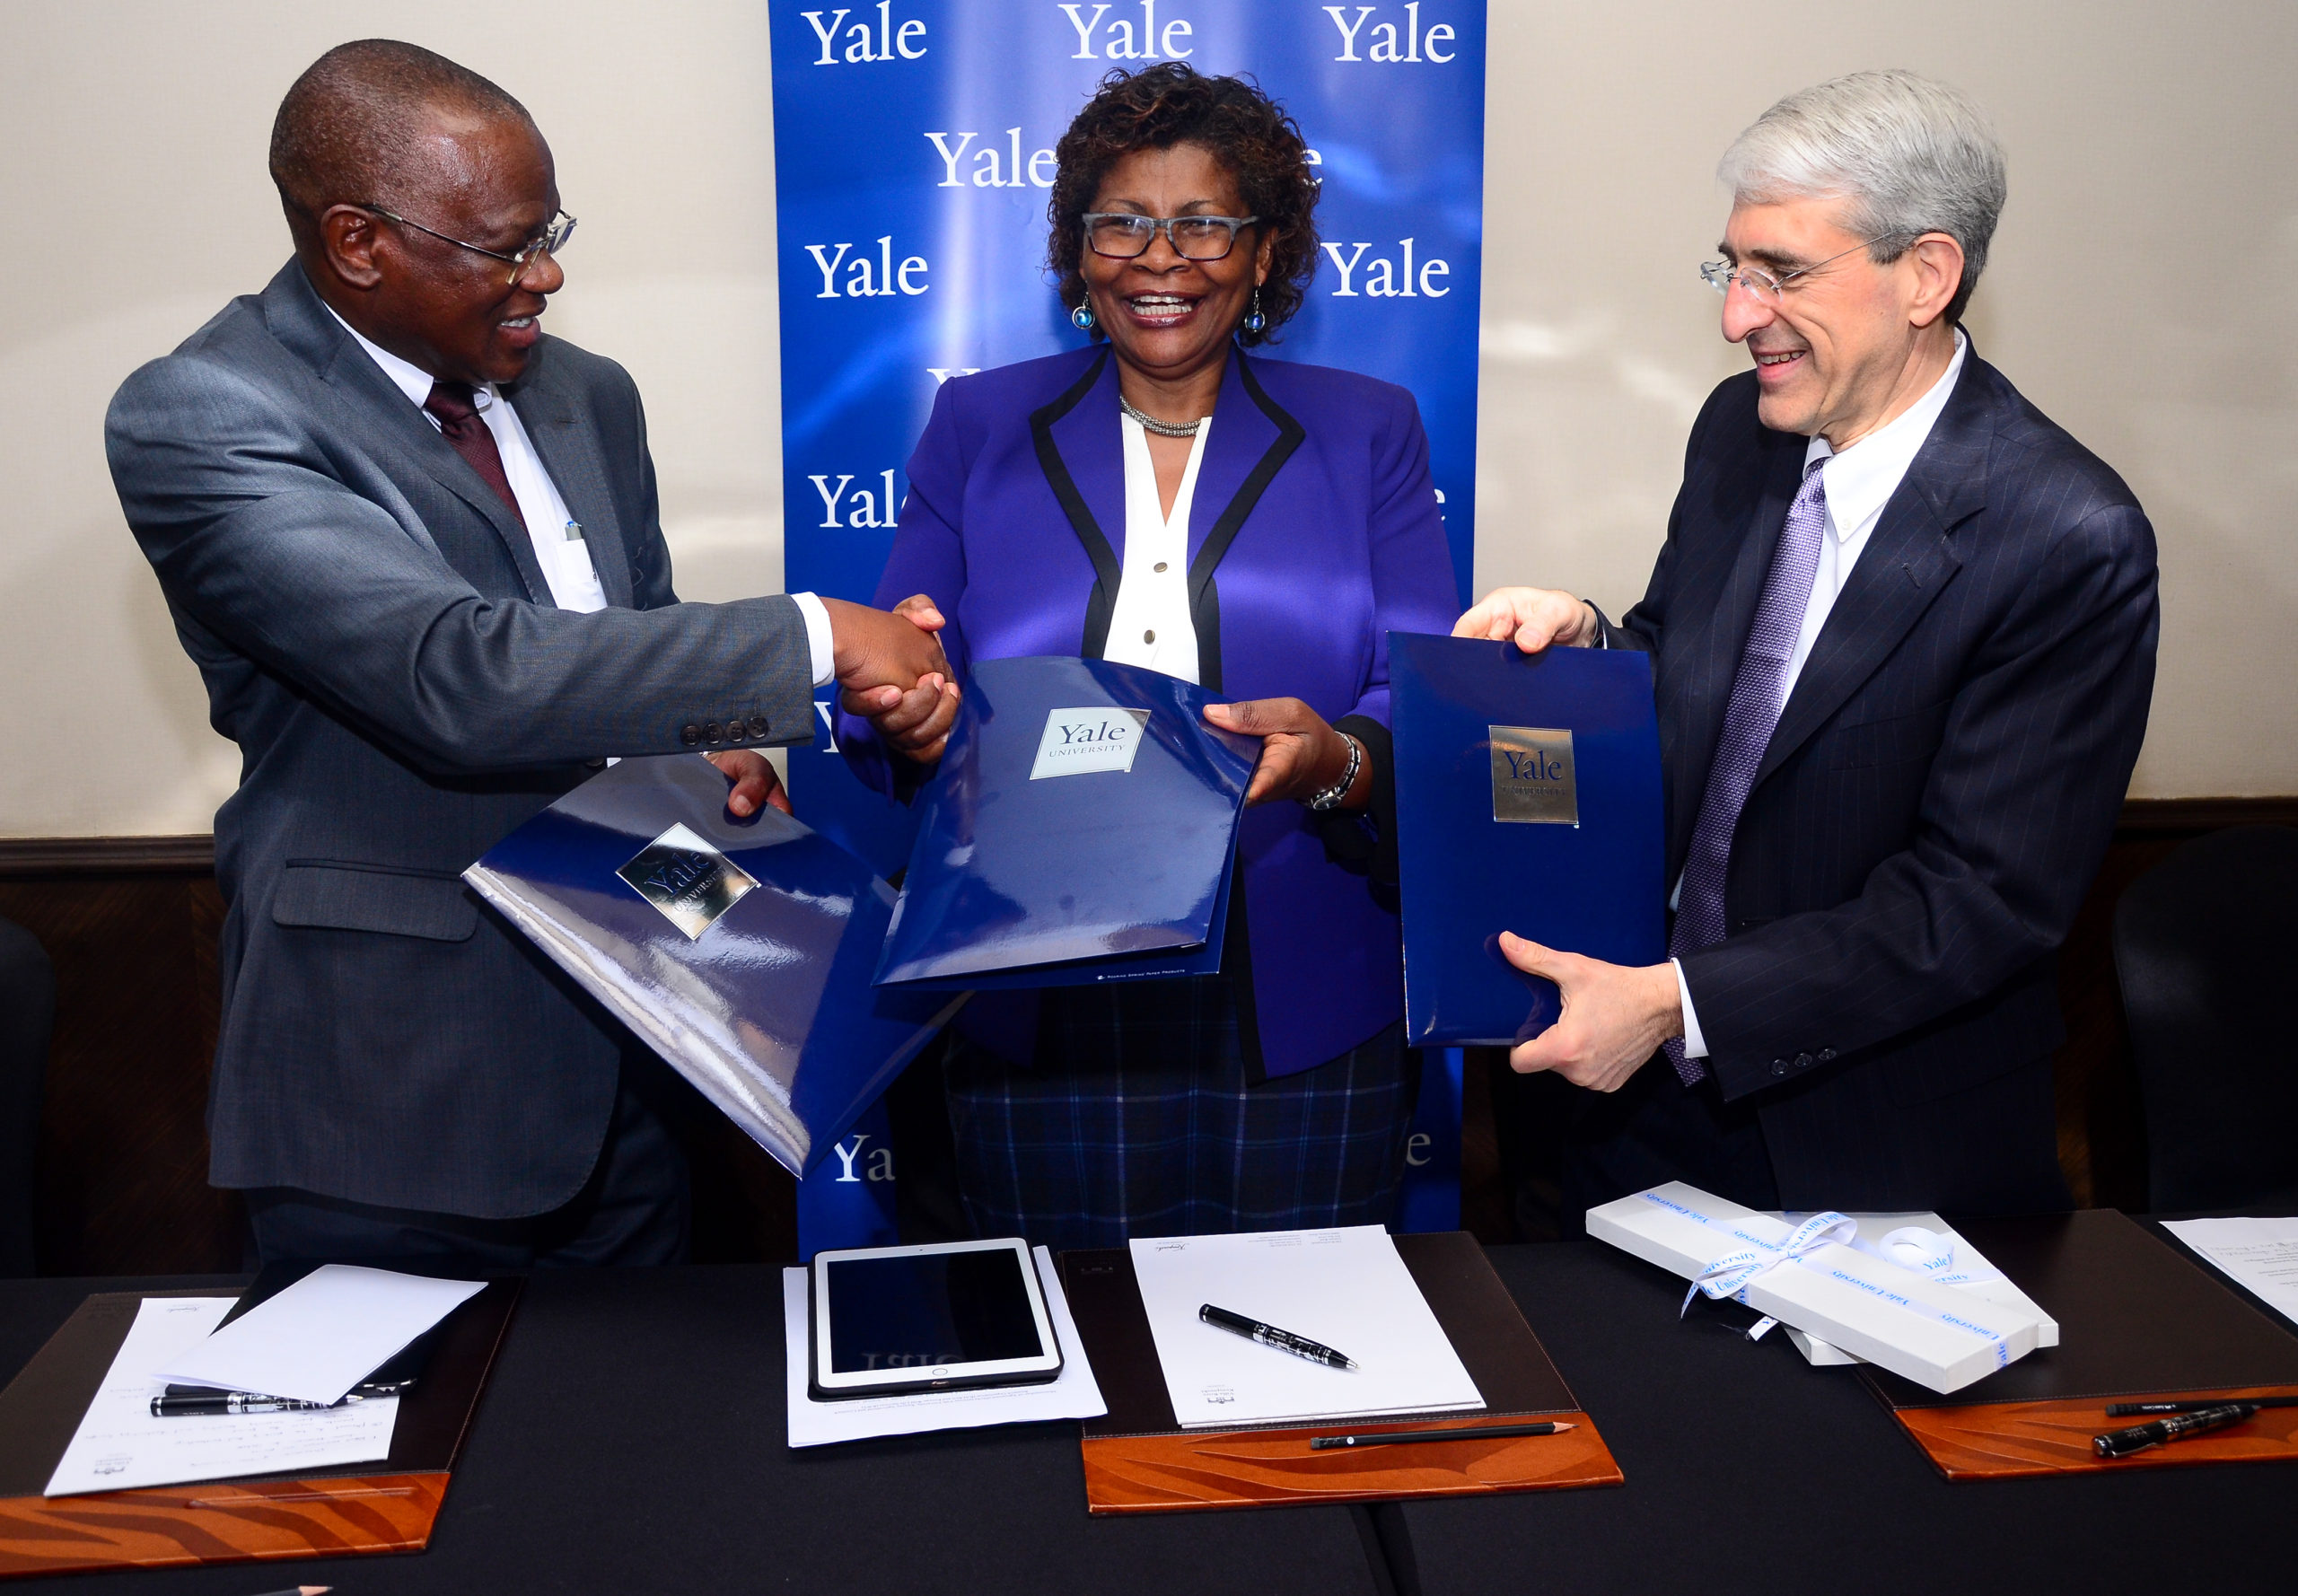 Yale University President Peter Salovey (right), Kenya Agricultural & Livestock Research Organisation (KALRO) Deputy Director Dr. Felister Makini and Kenya Wildlife Service (KWS) Deputy Director Dr. Samuel Kasiki exchange copies of the agreement after signing the Memorandum of Understanding on Friday.